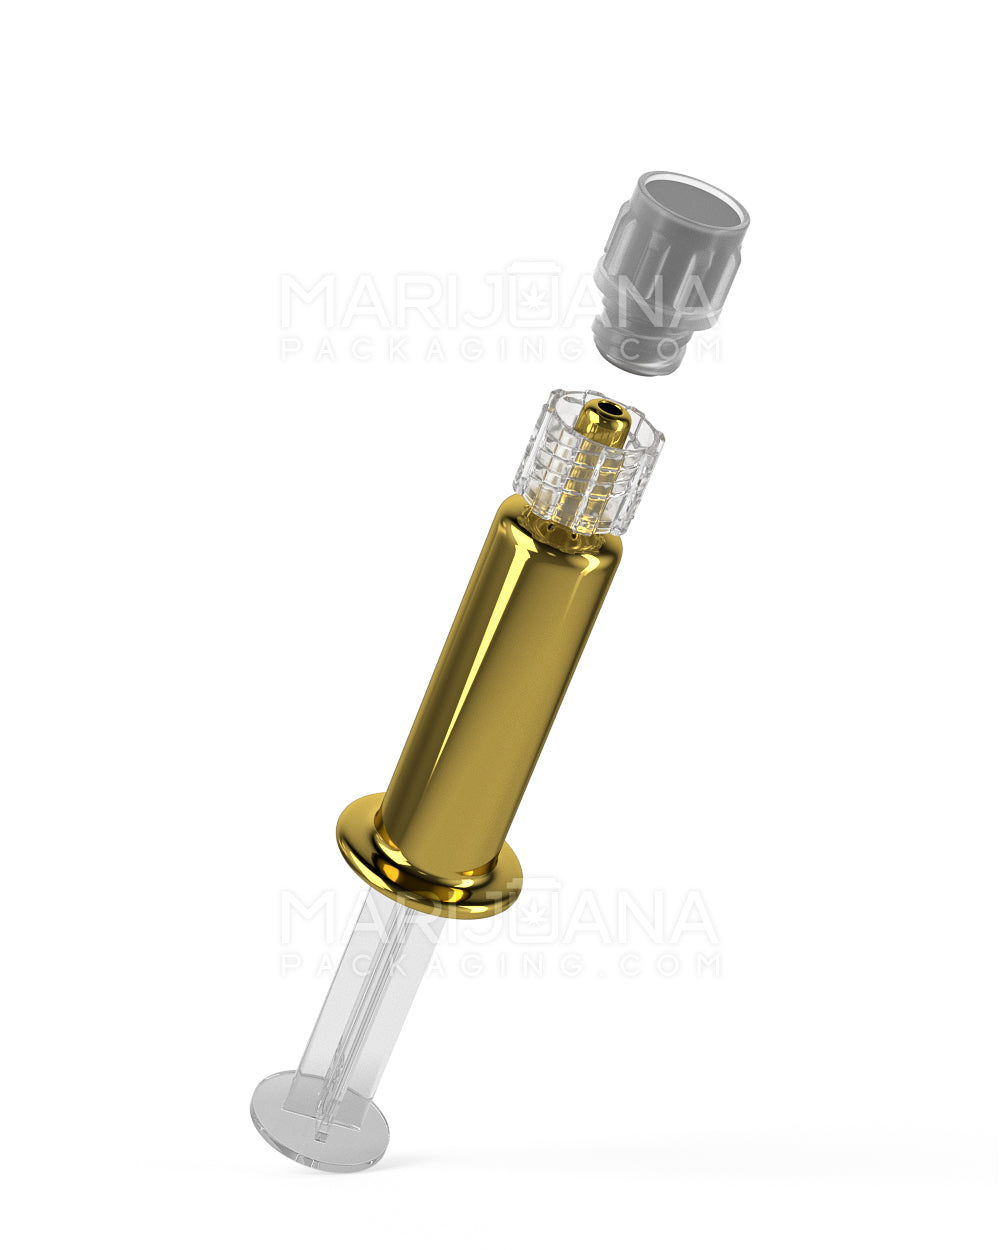 Luer Lock | Gold Glass Dab Applicator Syringes | 1mL - No Measurements - 100 Count - 5